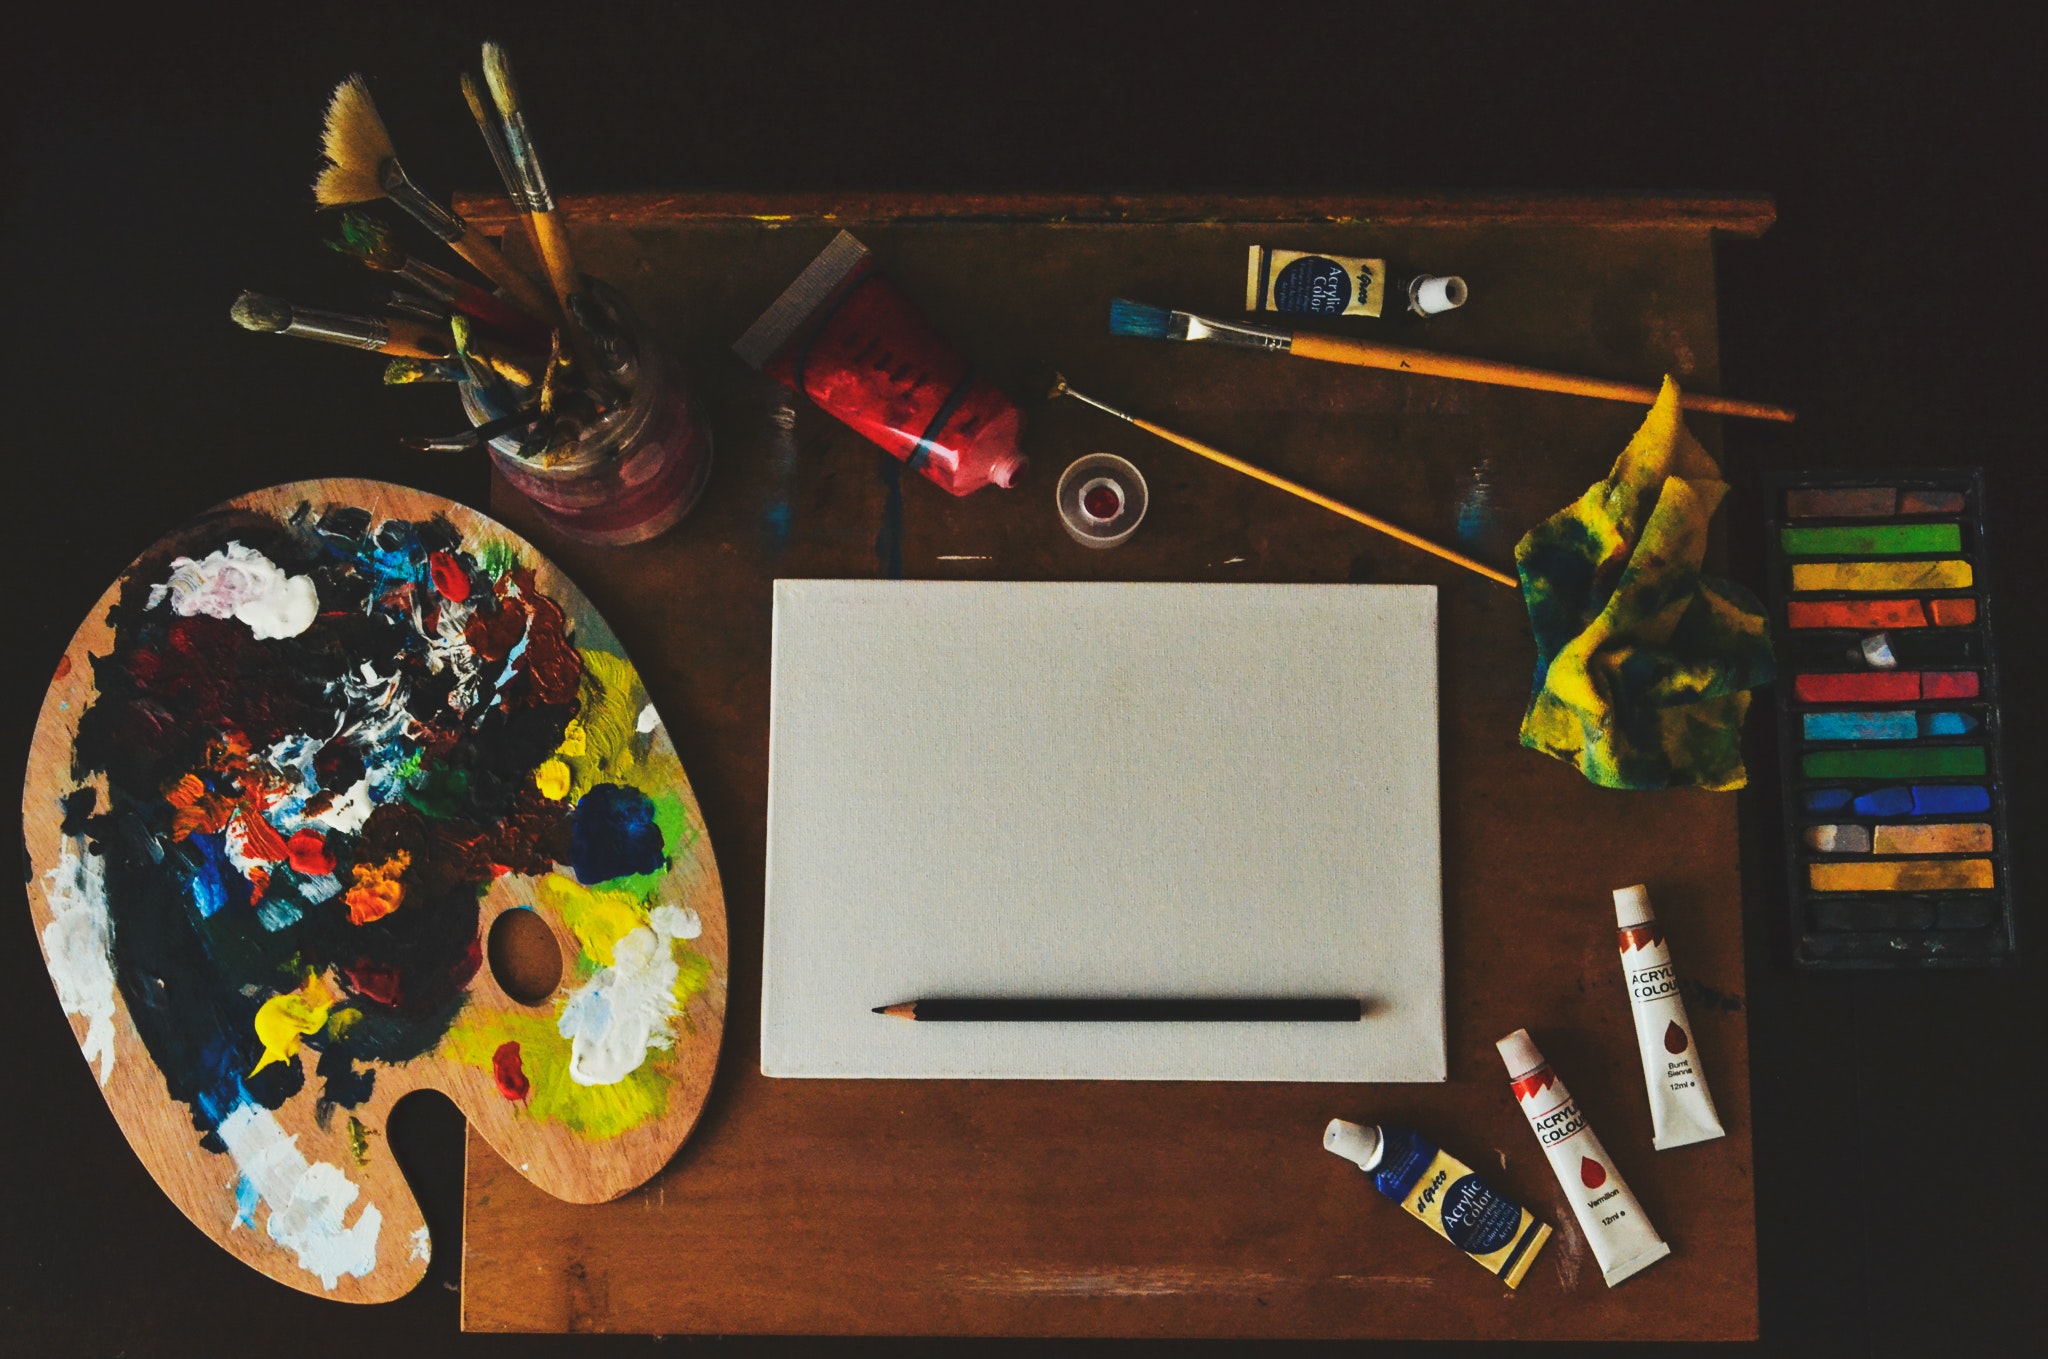 A color photograph showing an artist's canvas, tubes of paint, a tray of oil pastels, some used paintbrushes and palette.